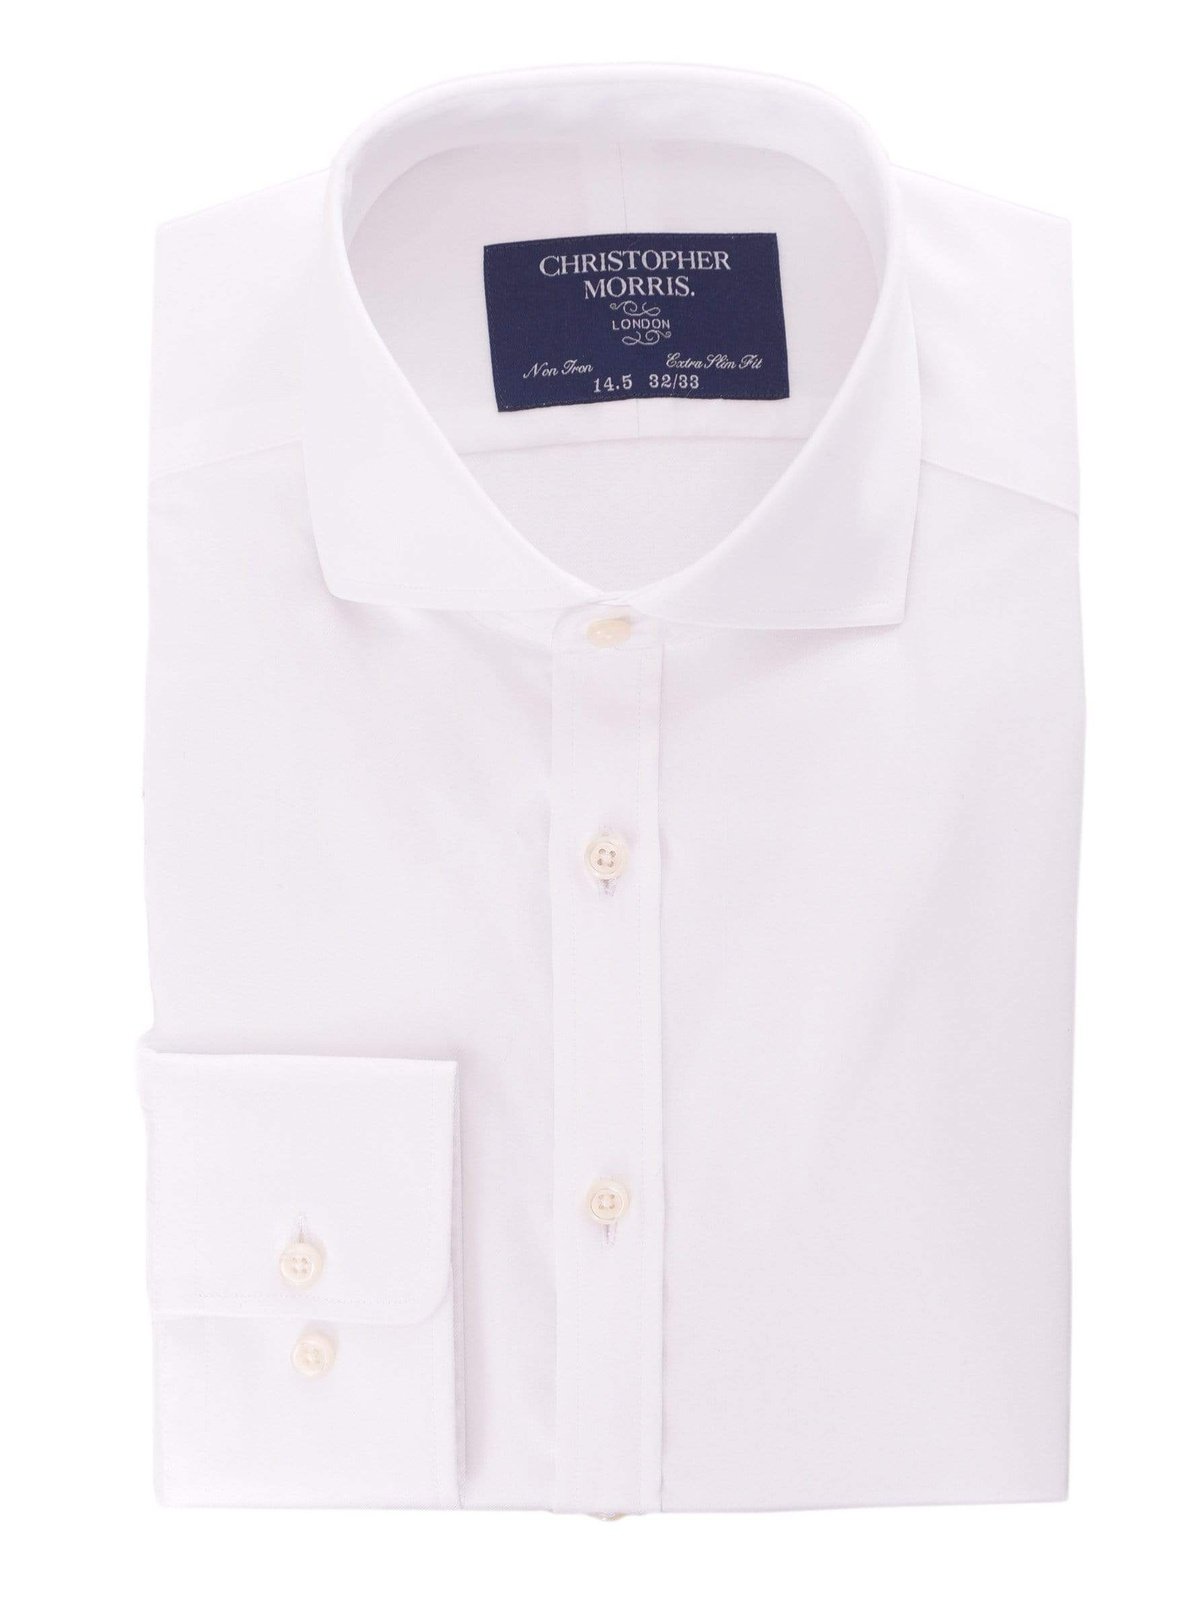 Christopher Morris SHIRTS 14 1/2 34/35 Mens Extra Slim Fit Solid White Twill Spread Collar Non Iron Cotton Dress Shirt